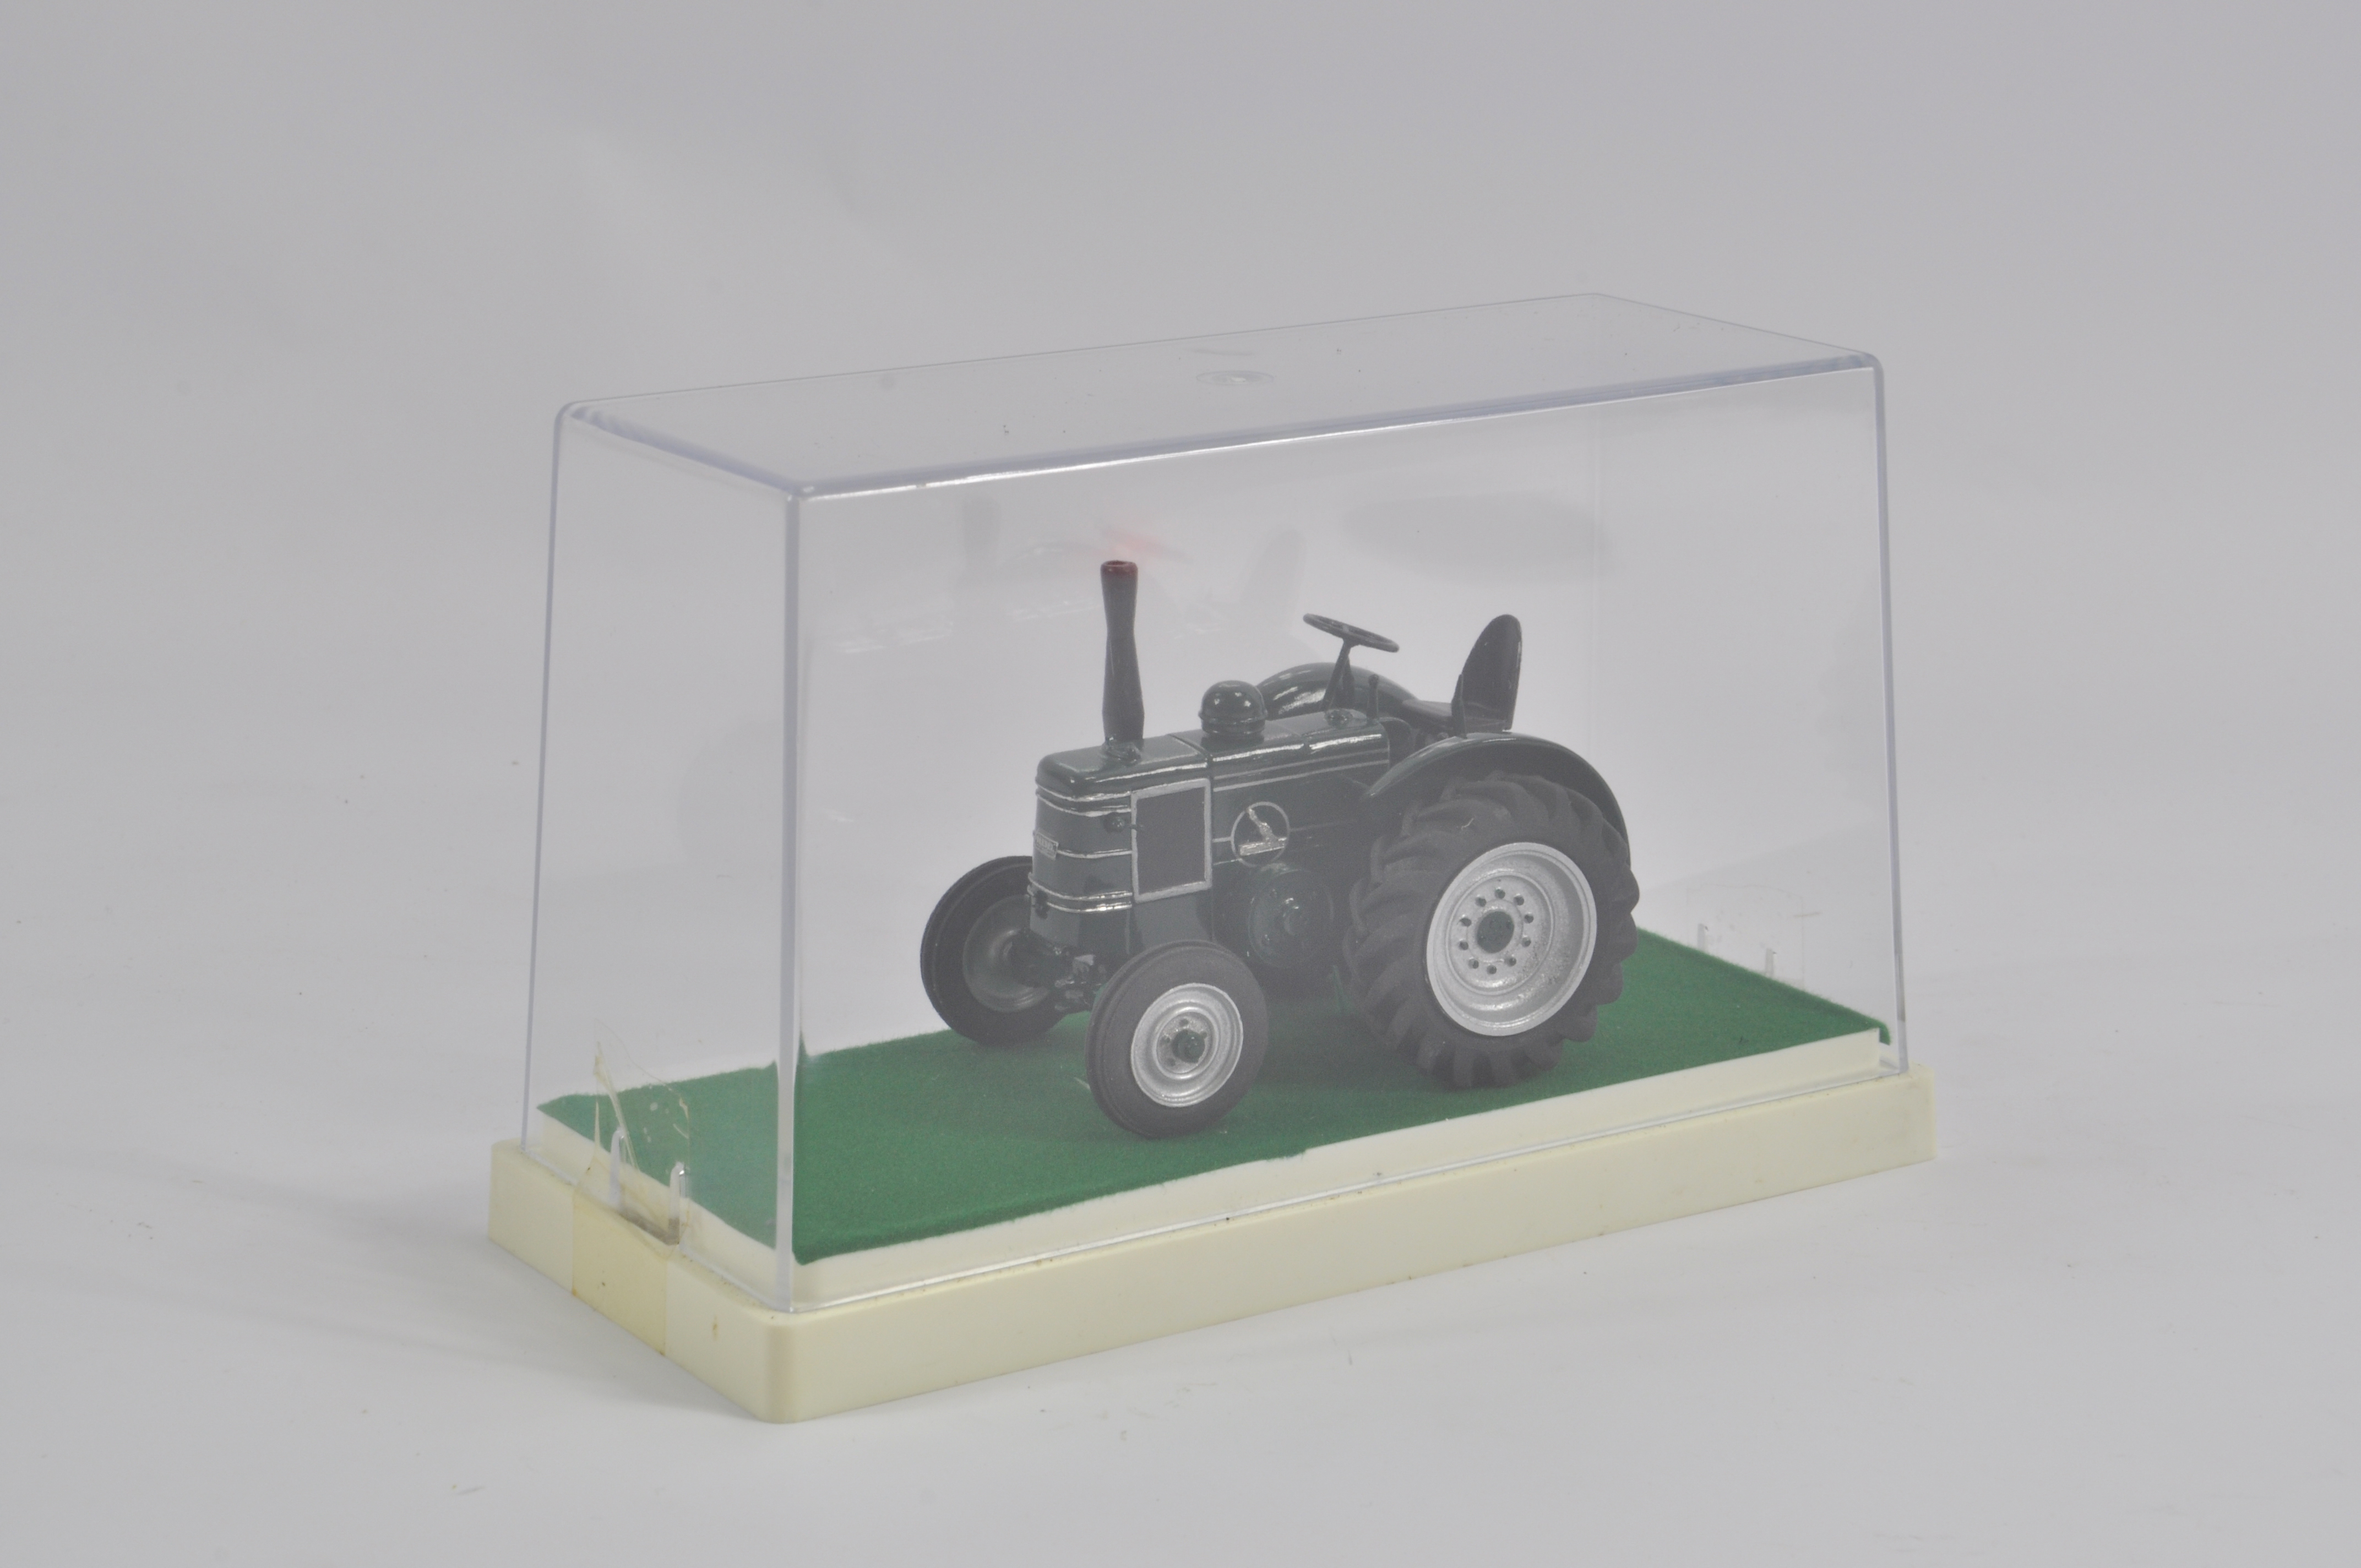 Finely built model in 1/32 scale of a Field Marshall Tractor. NM to M.